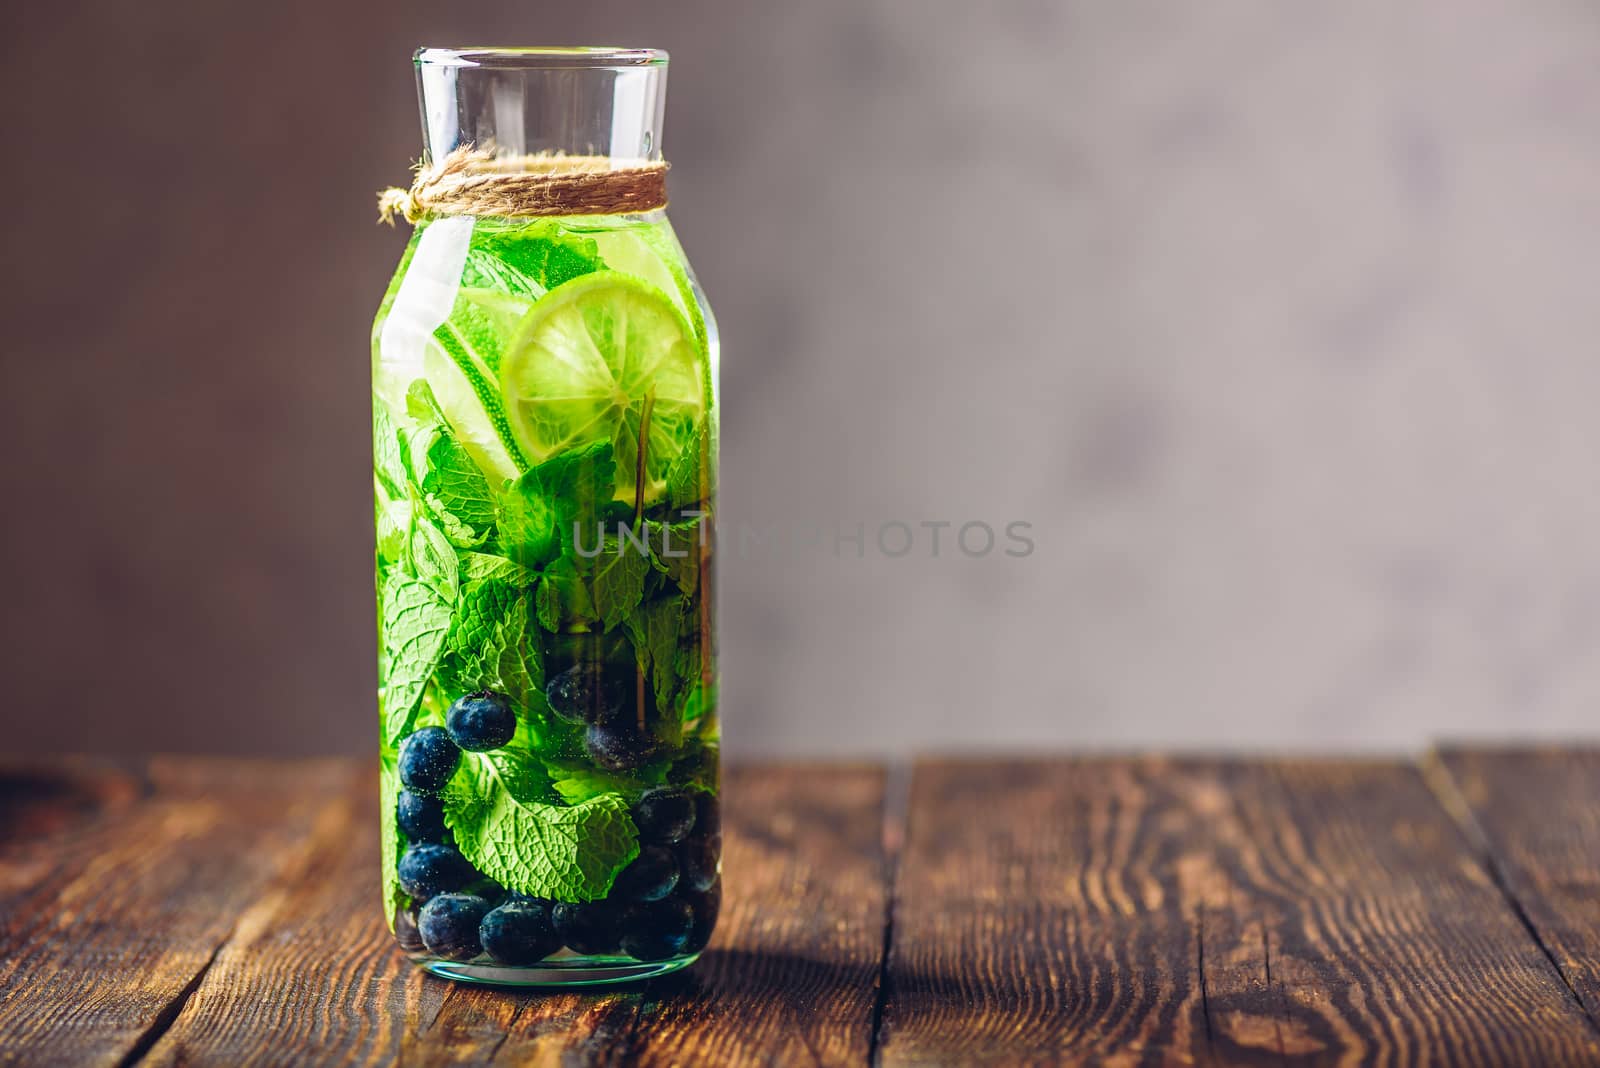 Jug of Water Flavored with Lime, Mint and Blueberry. Copy Space on the Right.